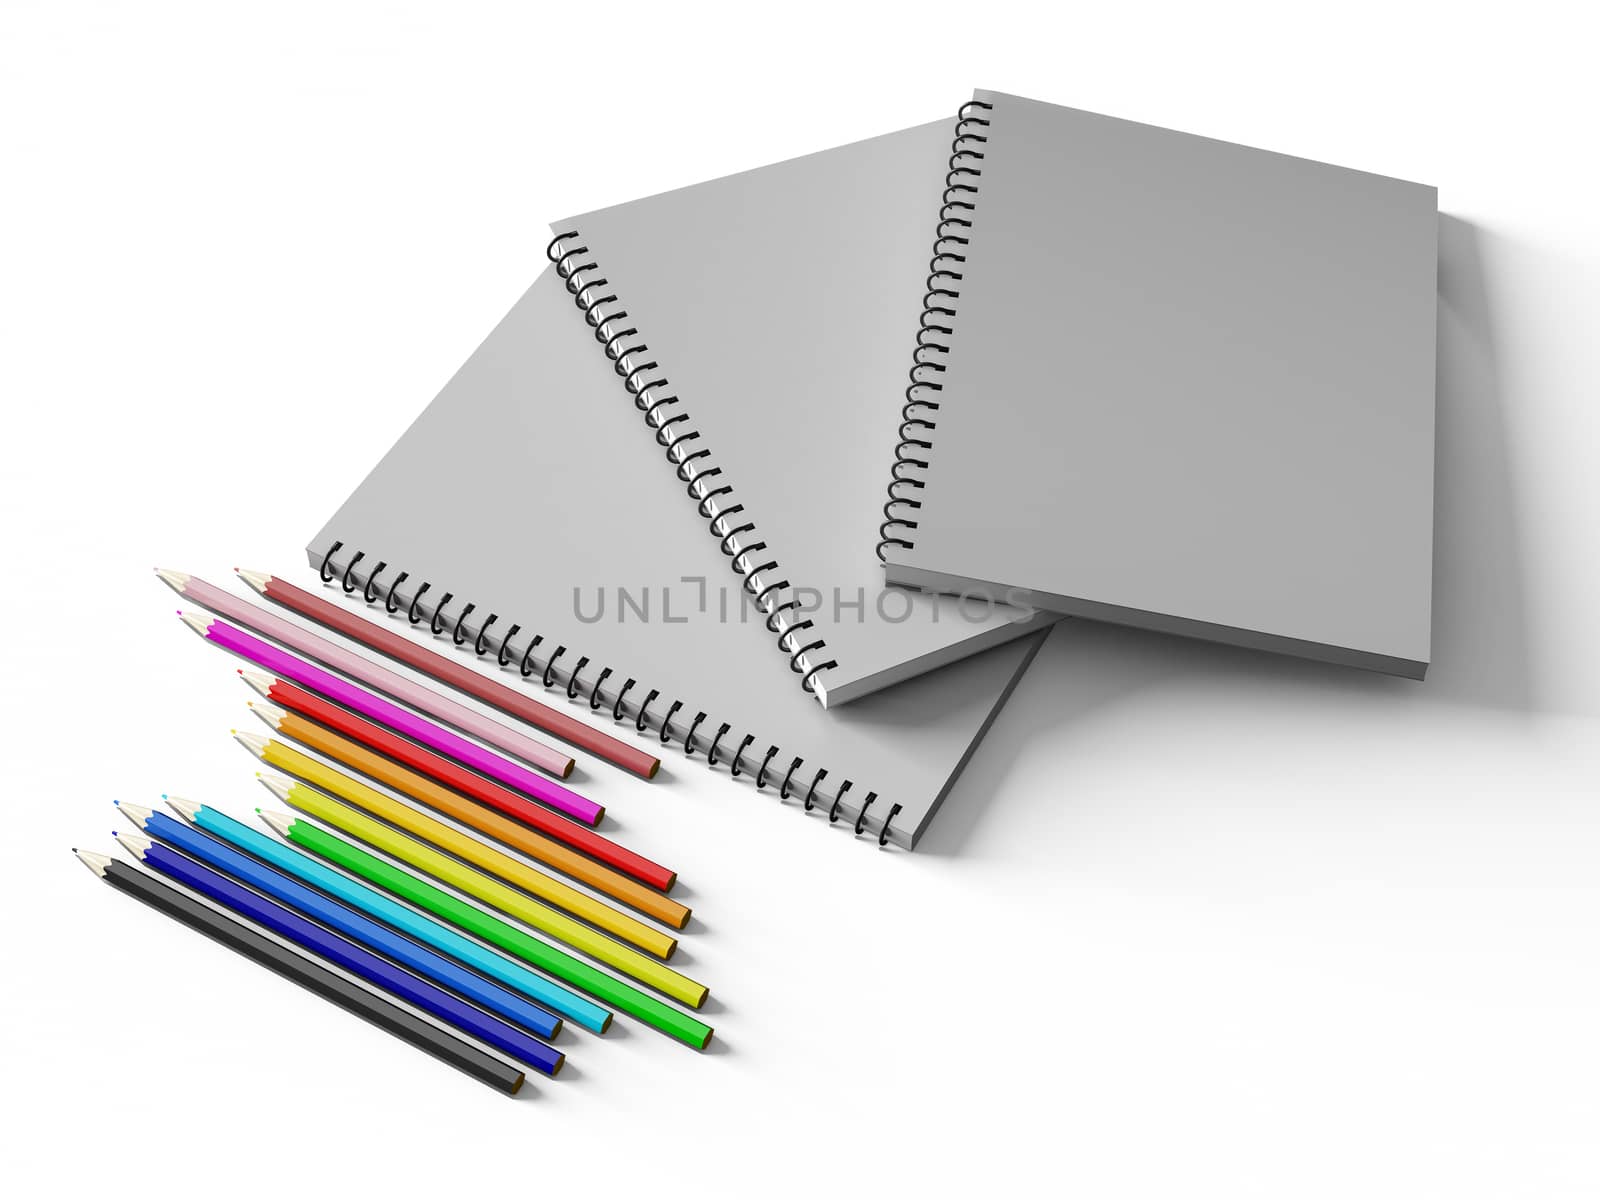 notebook with colored pencils on White background, stationary object